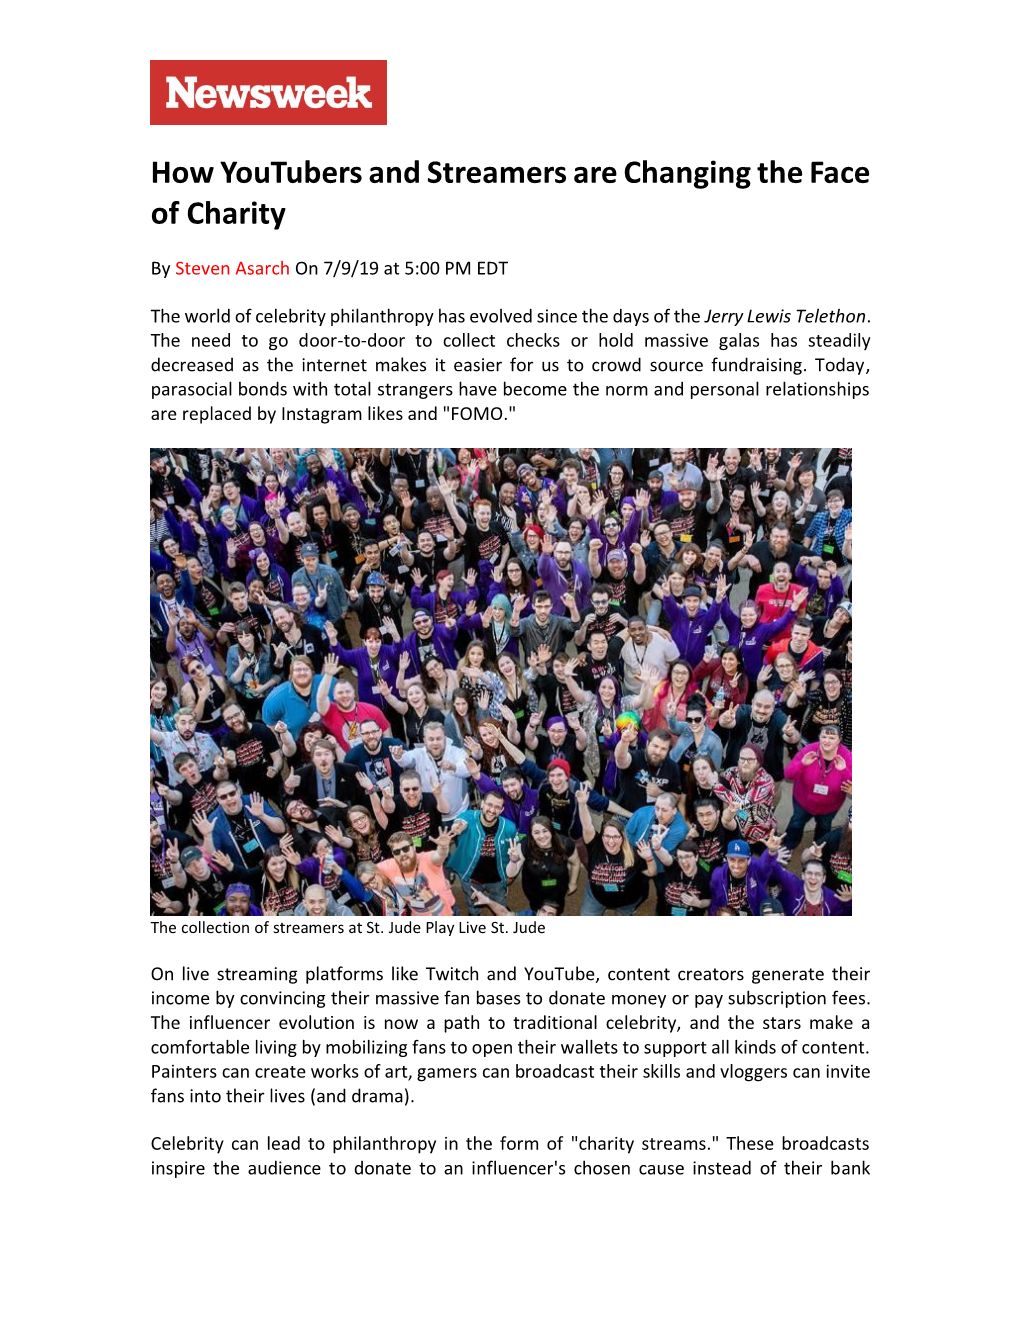 How Youtubers and Streamers Are Changing the Face of Charity